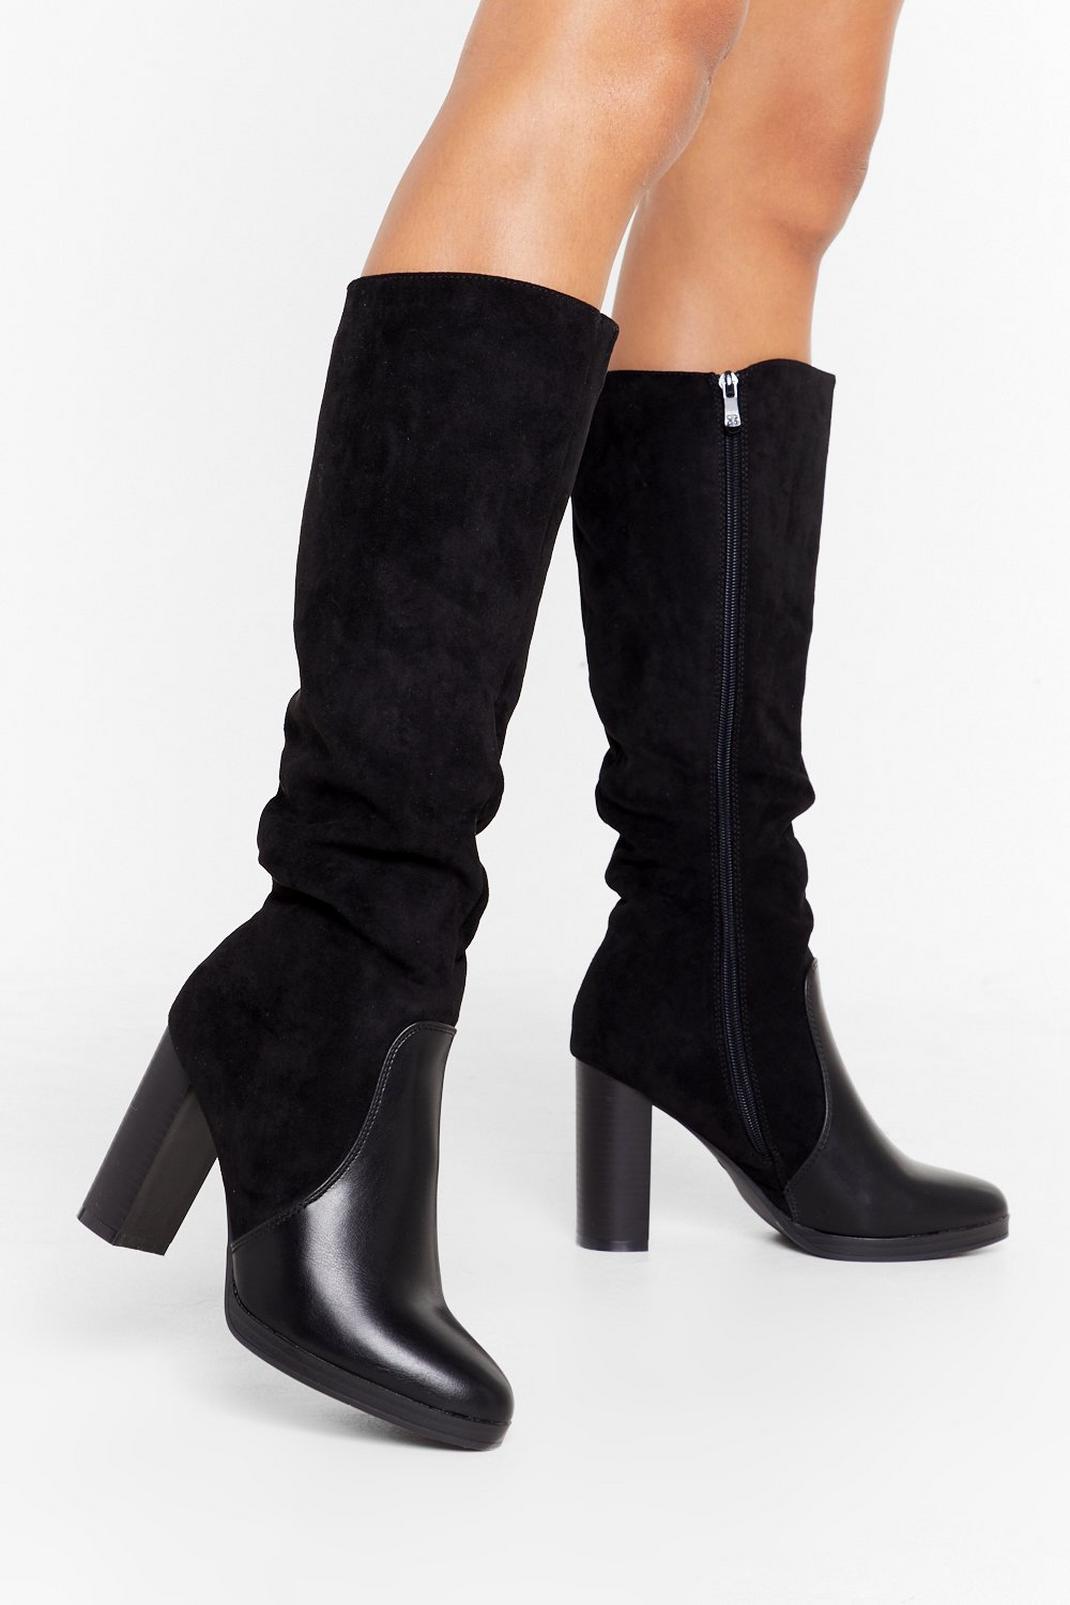 Opposites Attract Two-Tone Knee-High Boots image number 1